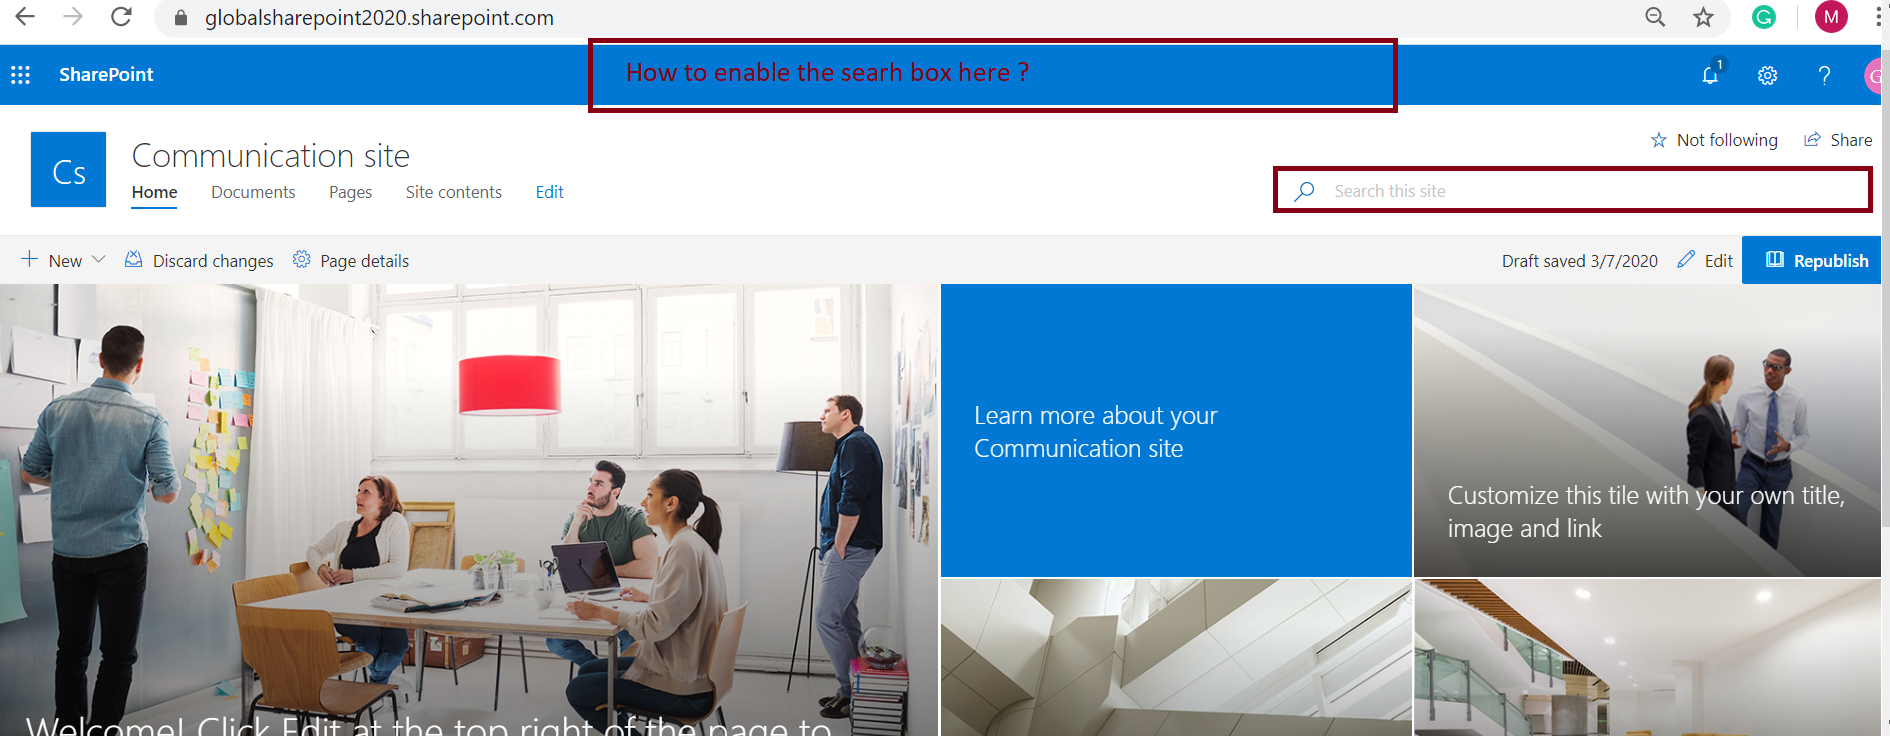 SharePoint search box - How to enable search box in the ribbon